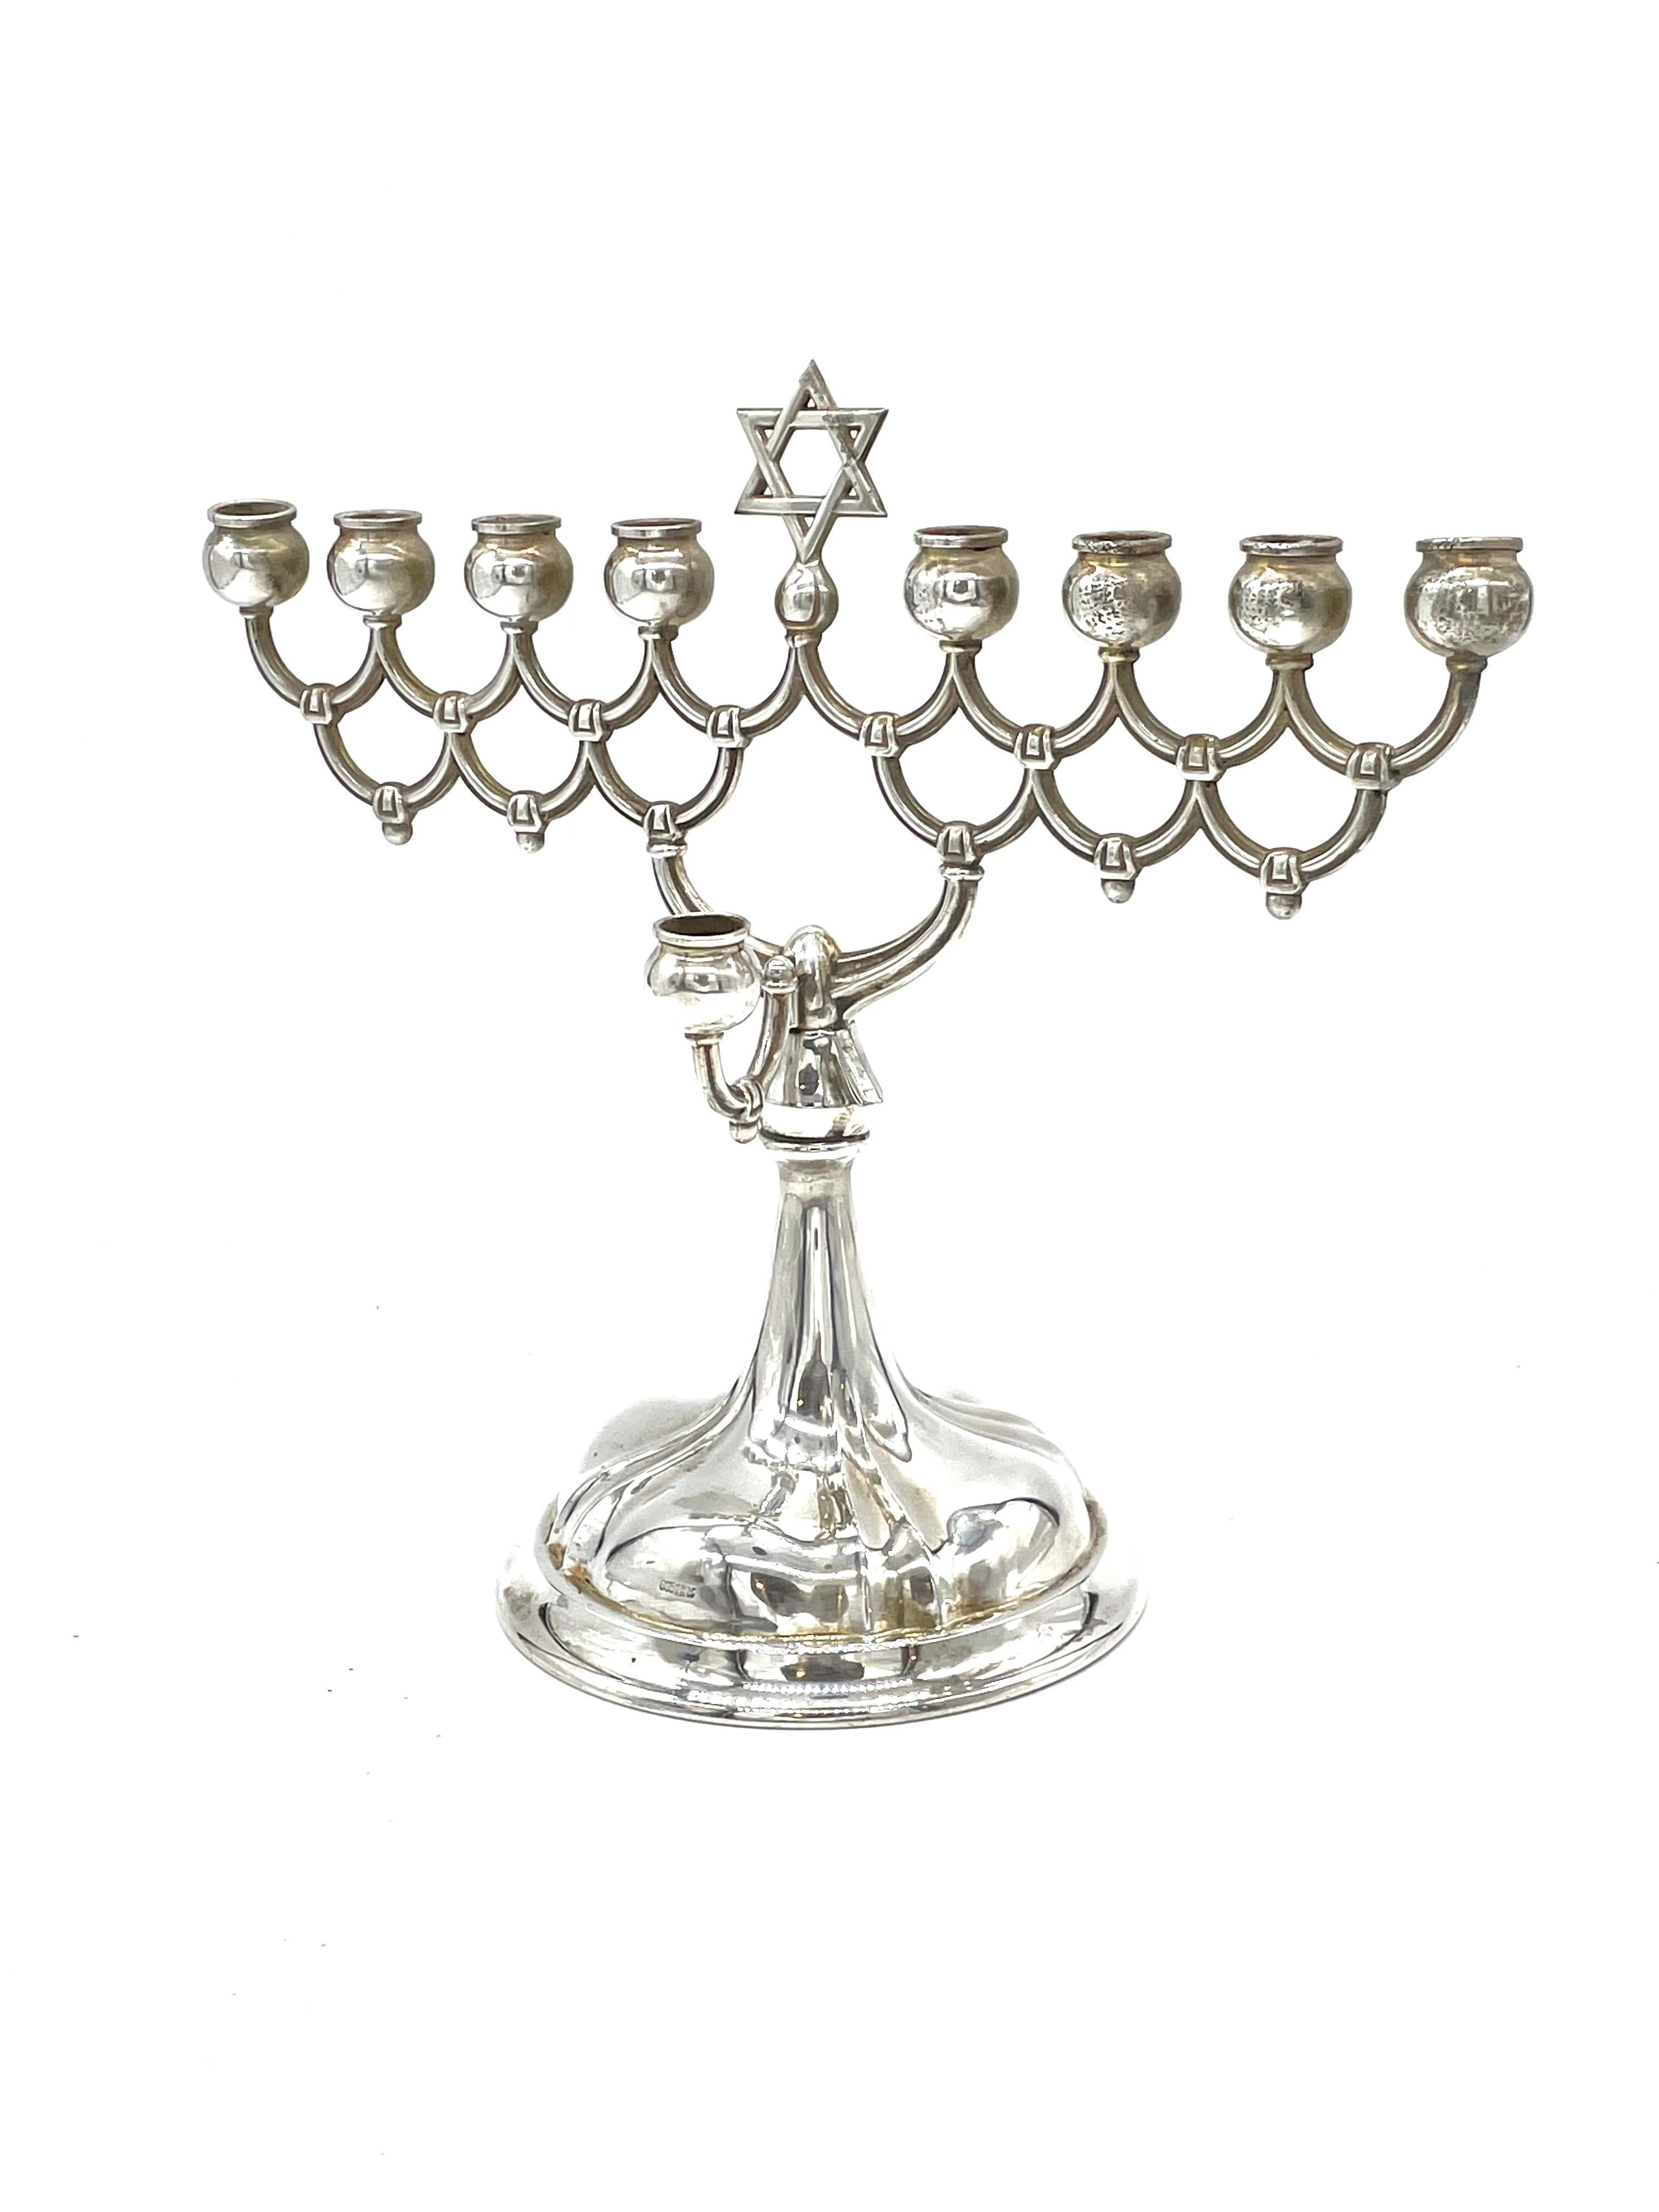 German silver Hanukkah lamp made in 1920’s features nine candleholders in traditional style. The round shaped candleholders are supported by tiers of concentric patterns. The harmonious toppling of arches with stylistic decoration is seen ornamented